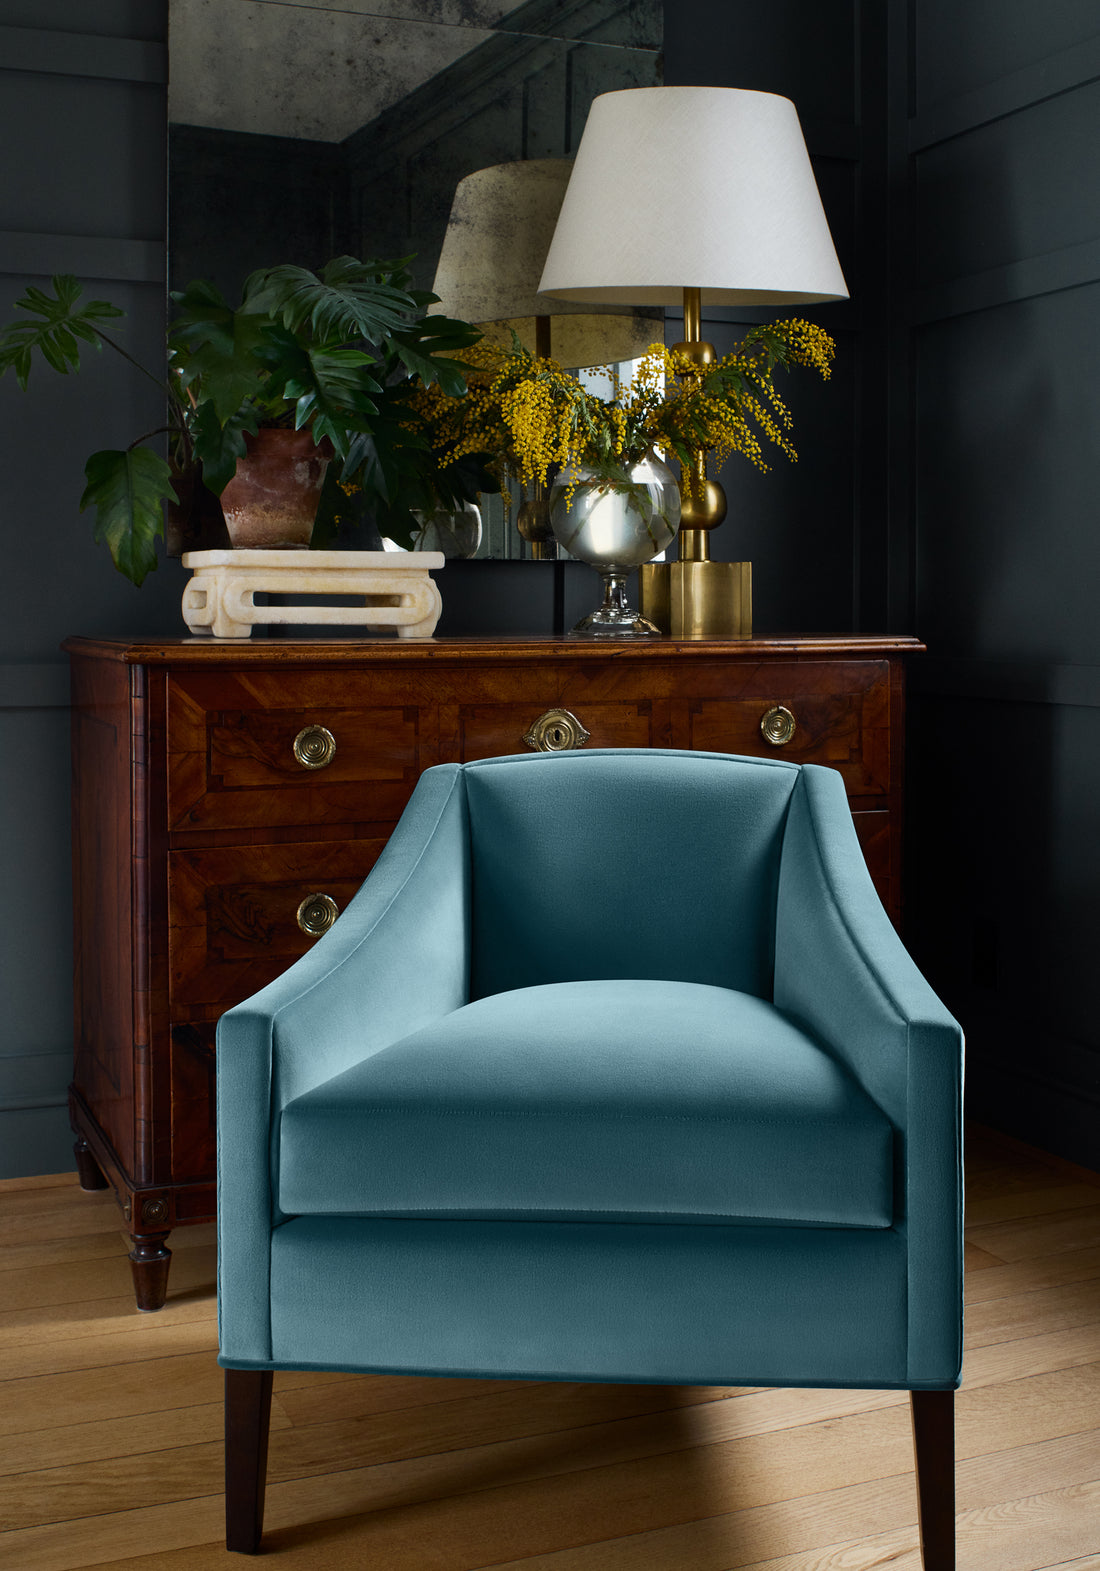 Chair in Lyra Velvet fabric in peacock color - pattern number W8919 - by Thibaut in the Lyra Velvets collection